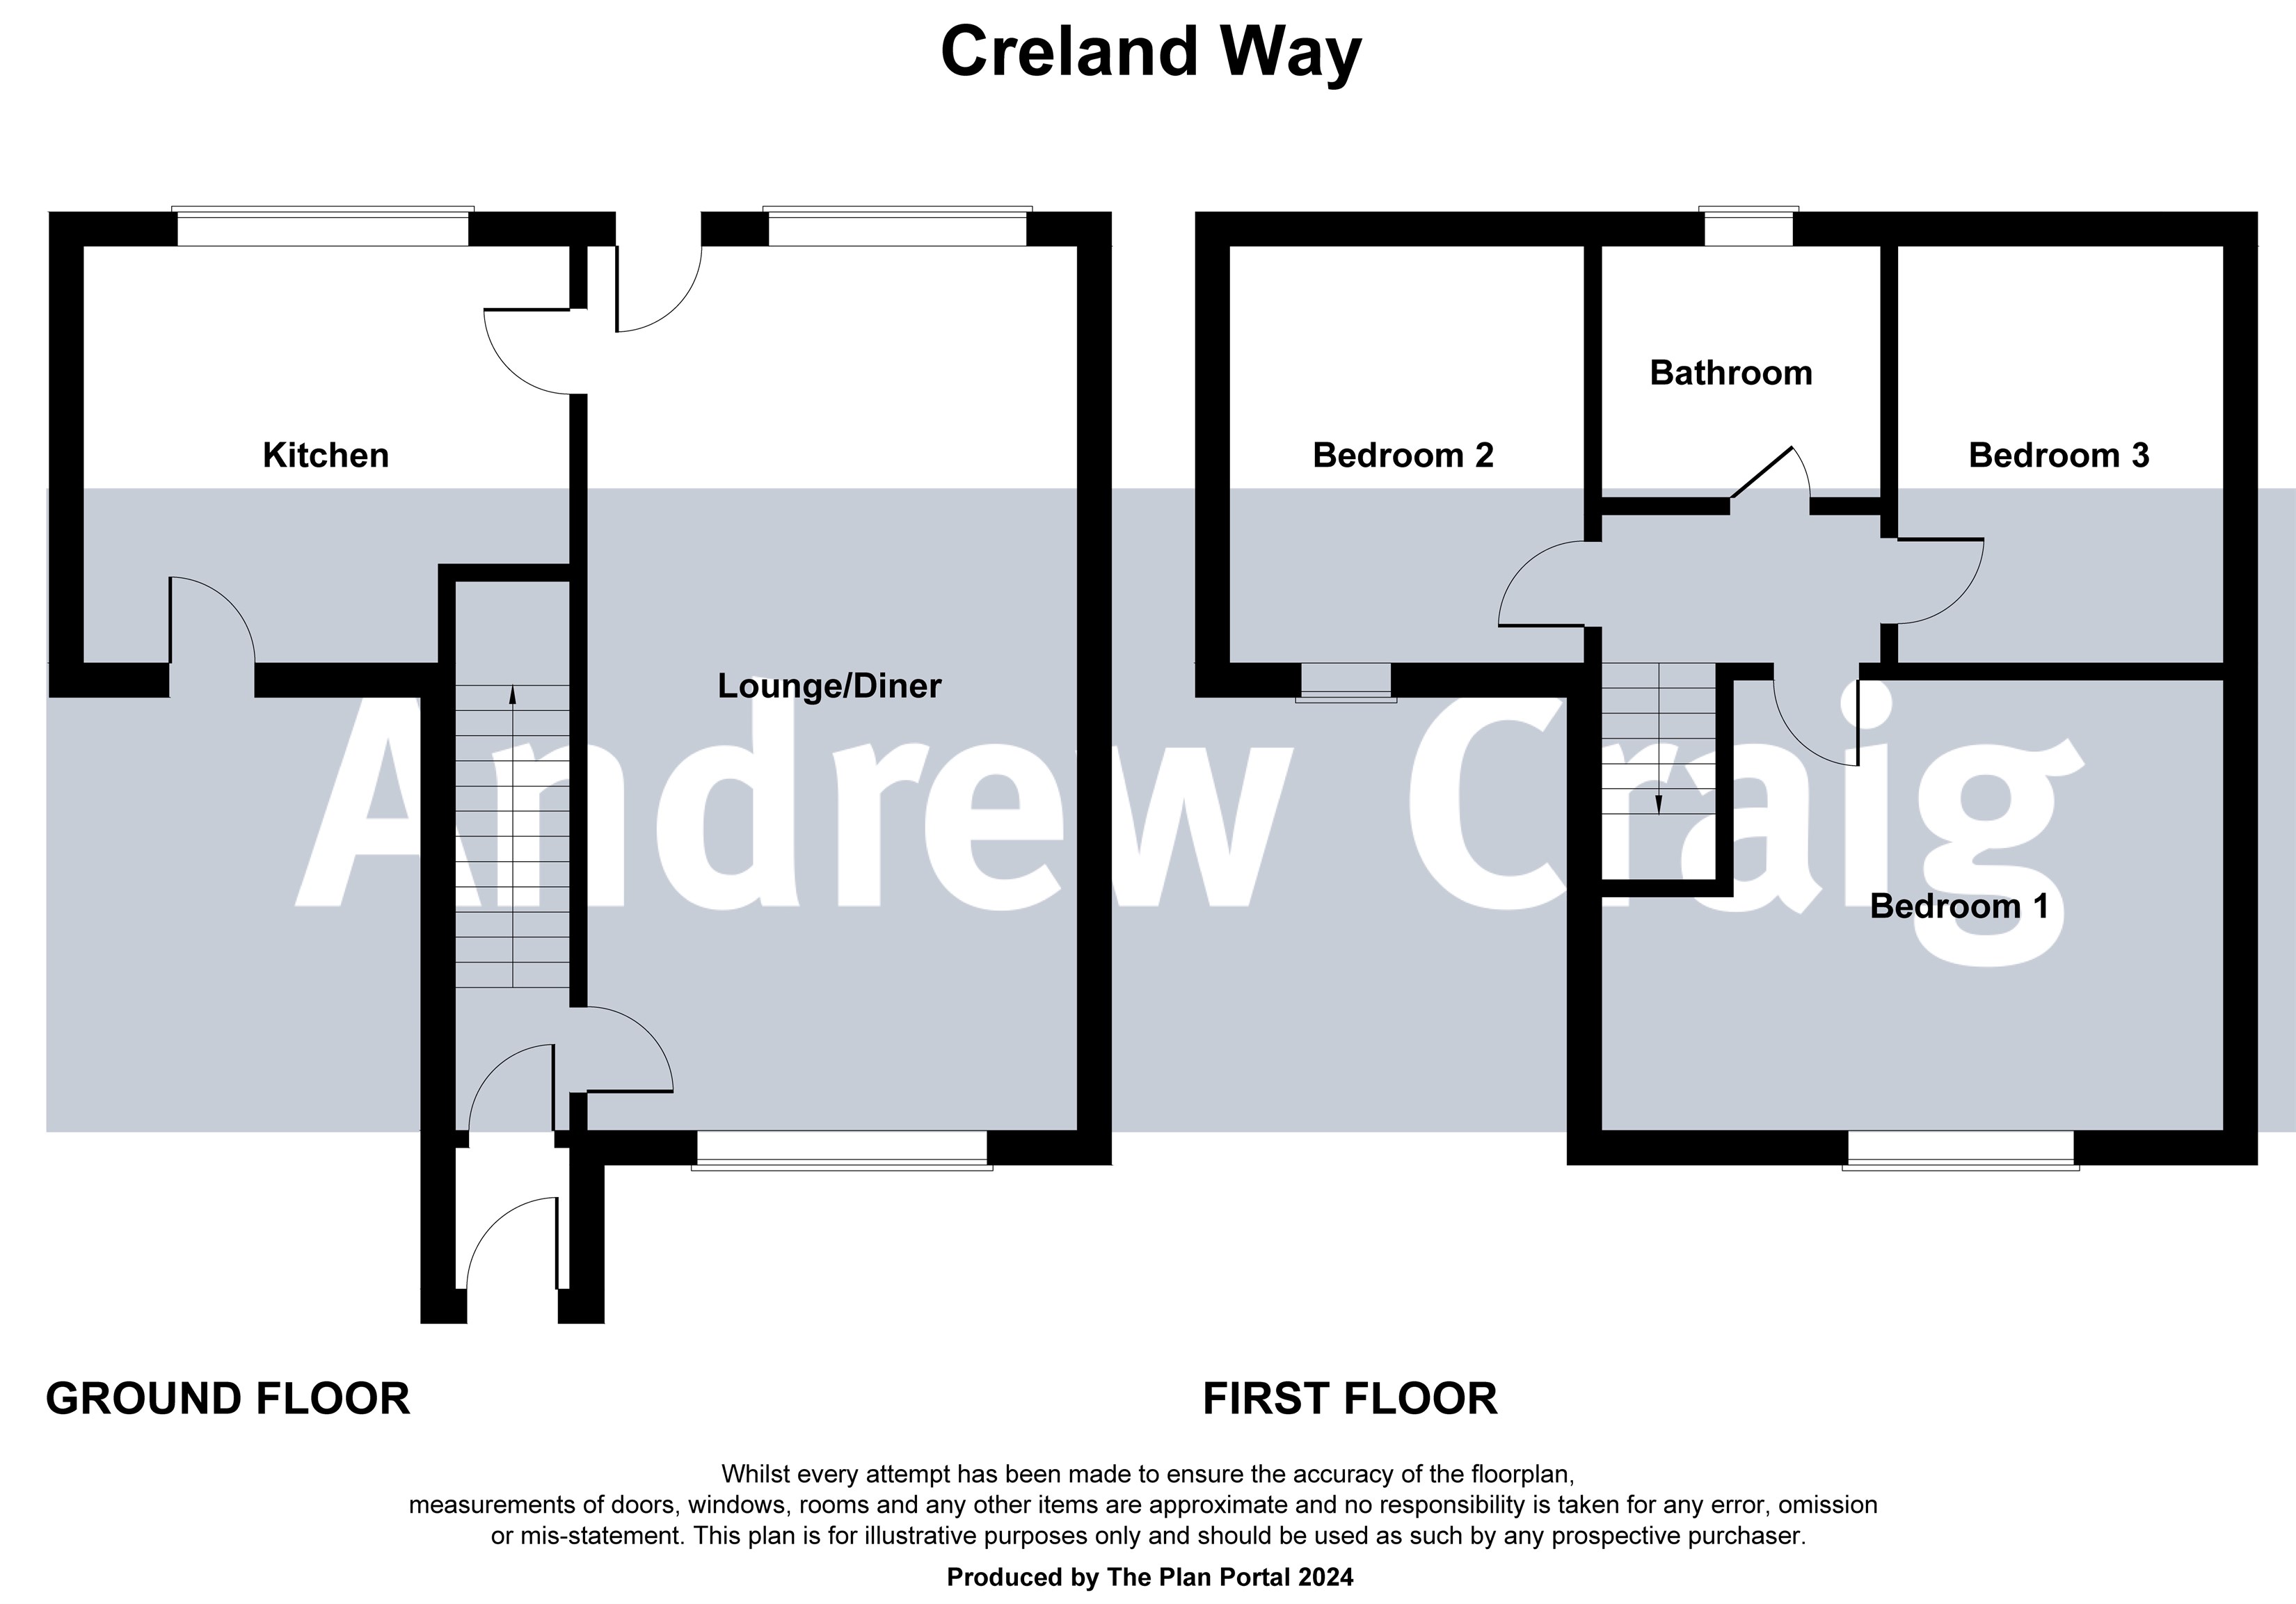 3 bed house for sale in Creland Way, Newcastle Upon Tyne - Property floorplan